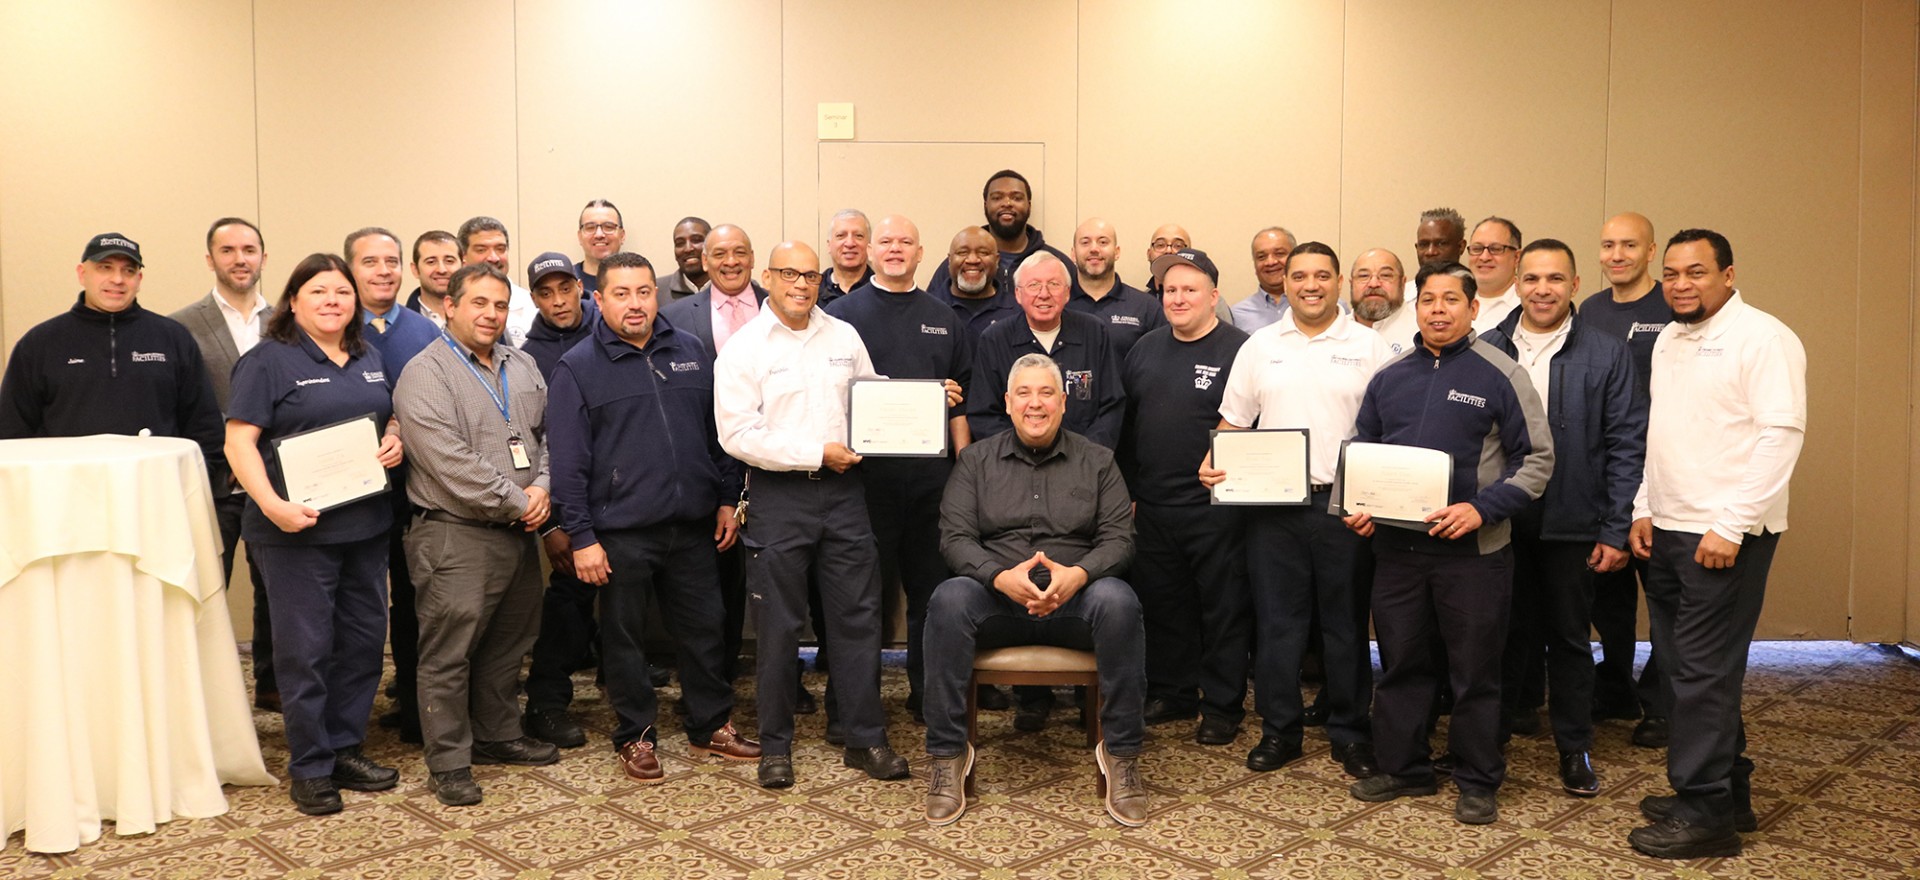 A group of Columbia Residential employees who completed the Building Operator Training program.